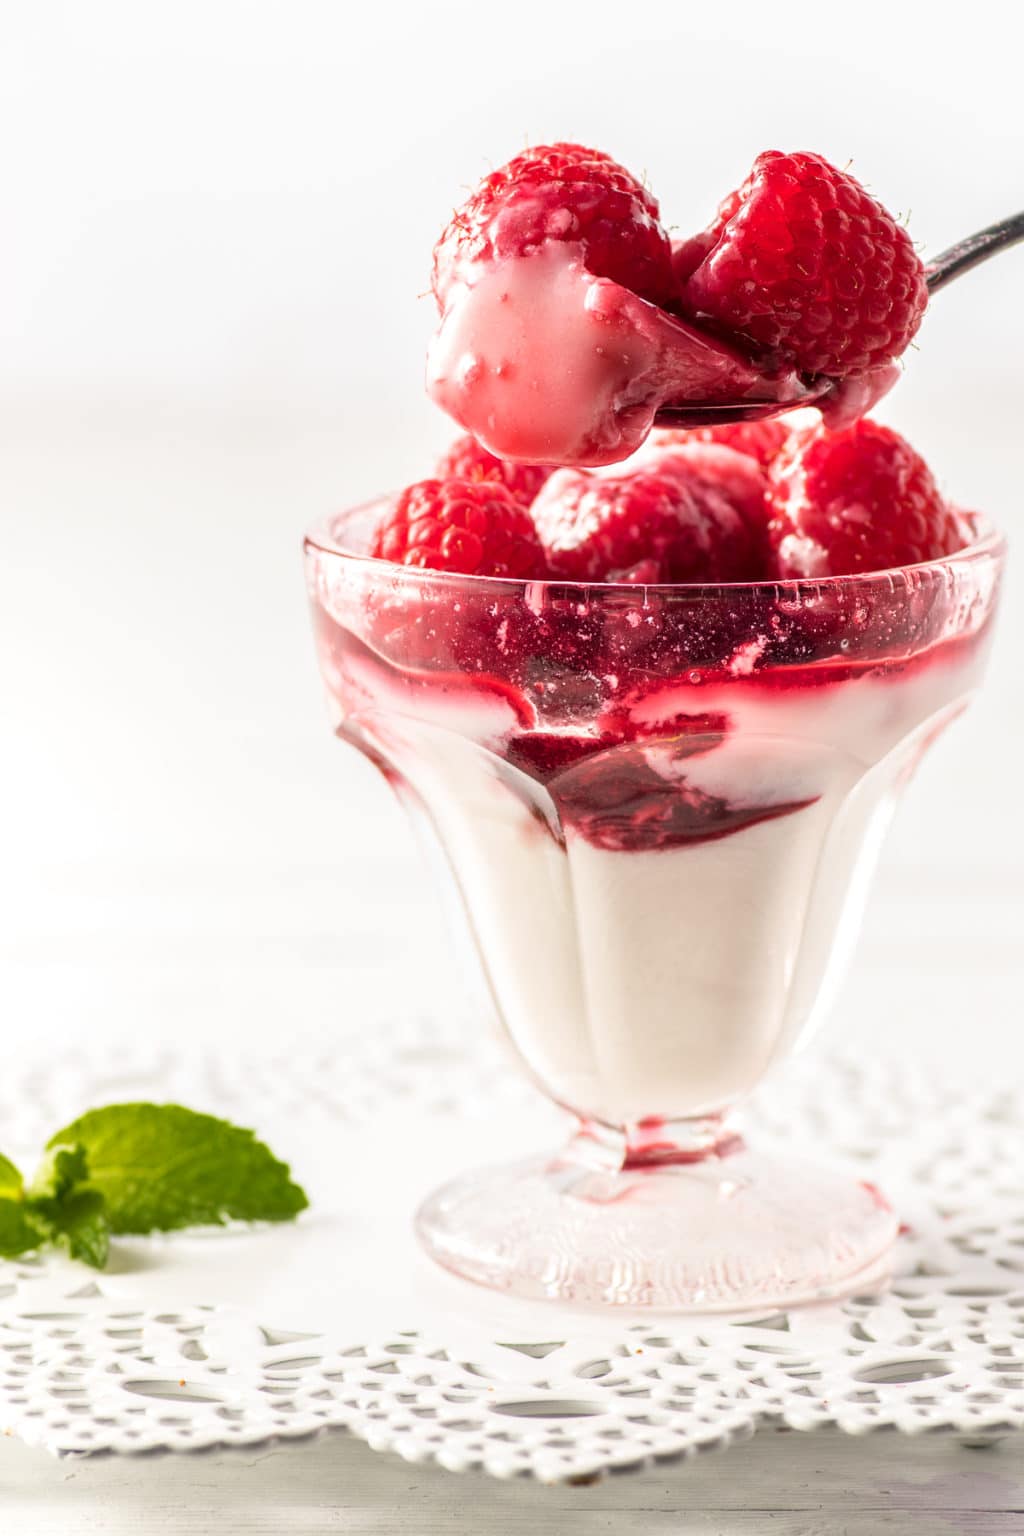 Dessert cup filled with raspberry Panna Cotta. Hovering above the dessert, is a teaspoon loaded with fresh raspberries and Panna Cotta. The dessert cup rests on a decorative white trivet.  A mint leaf  is blurred on the edge of the photo.